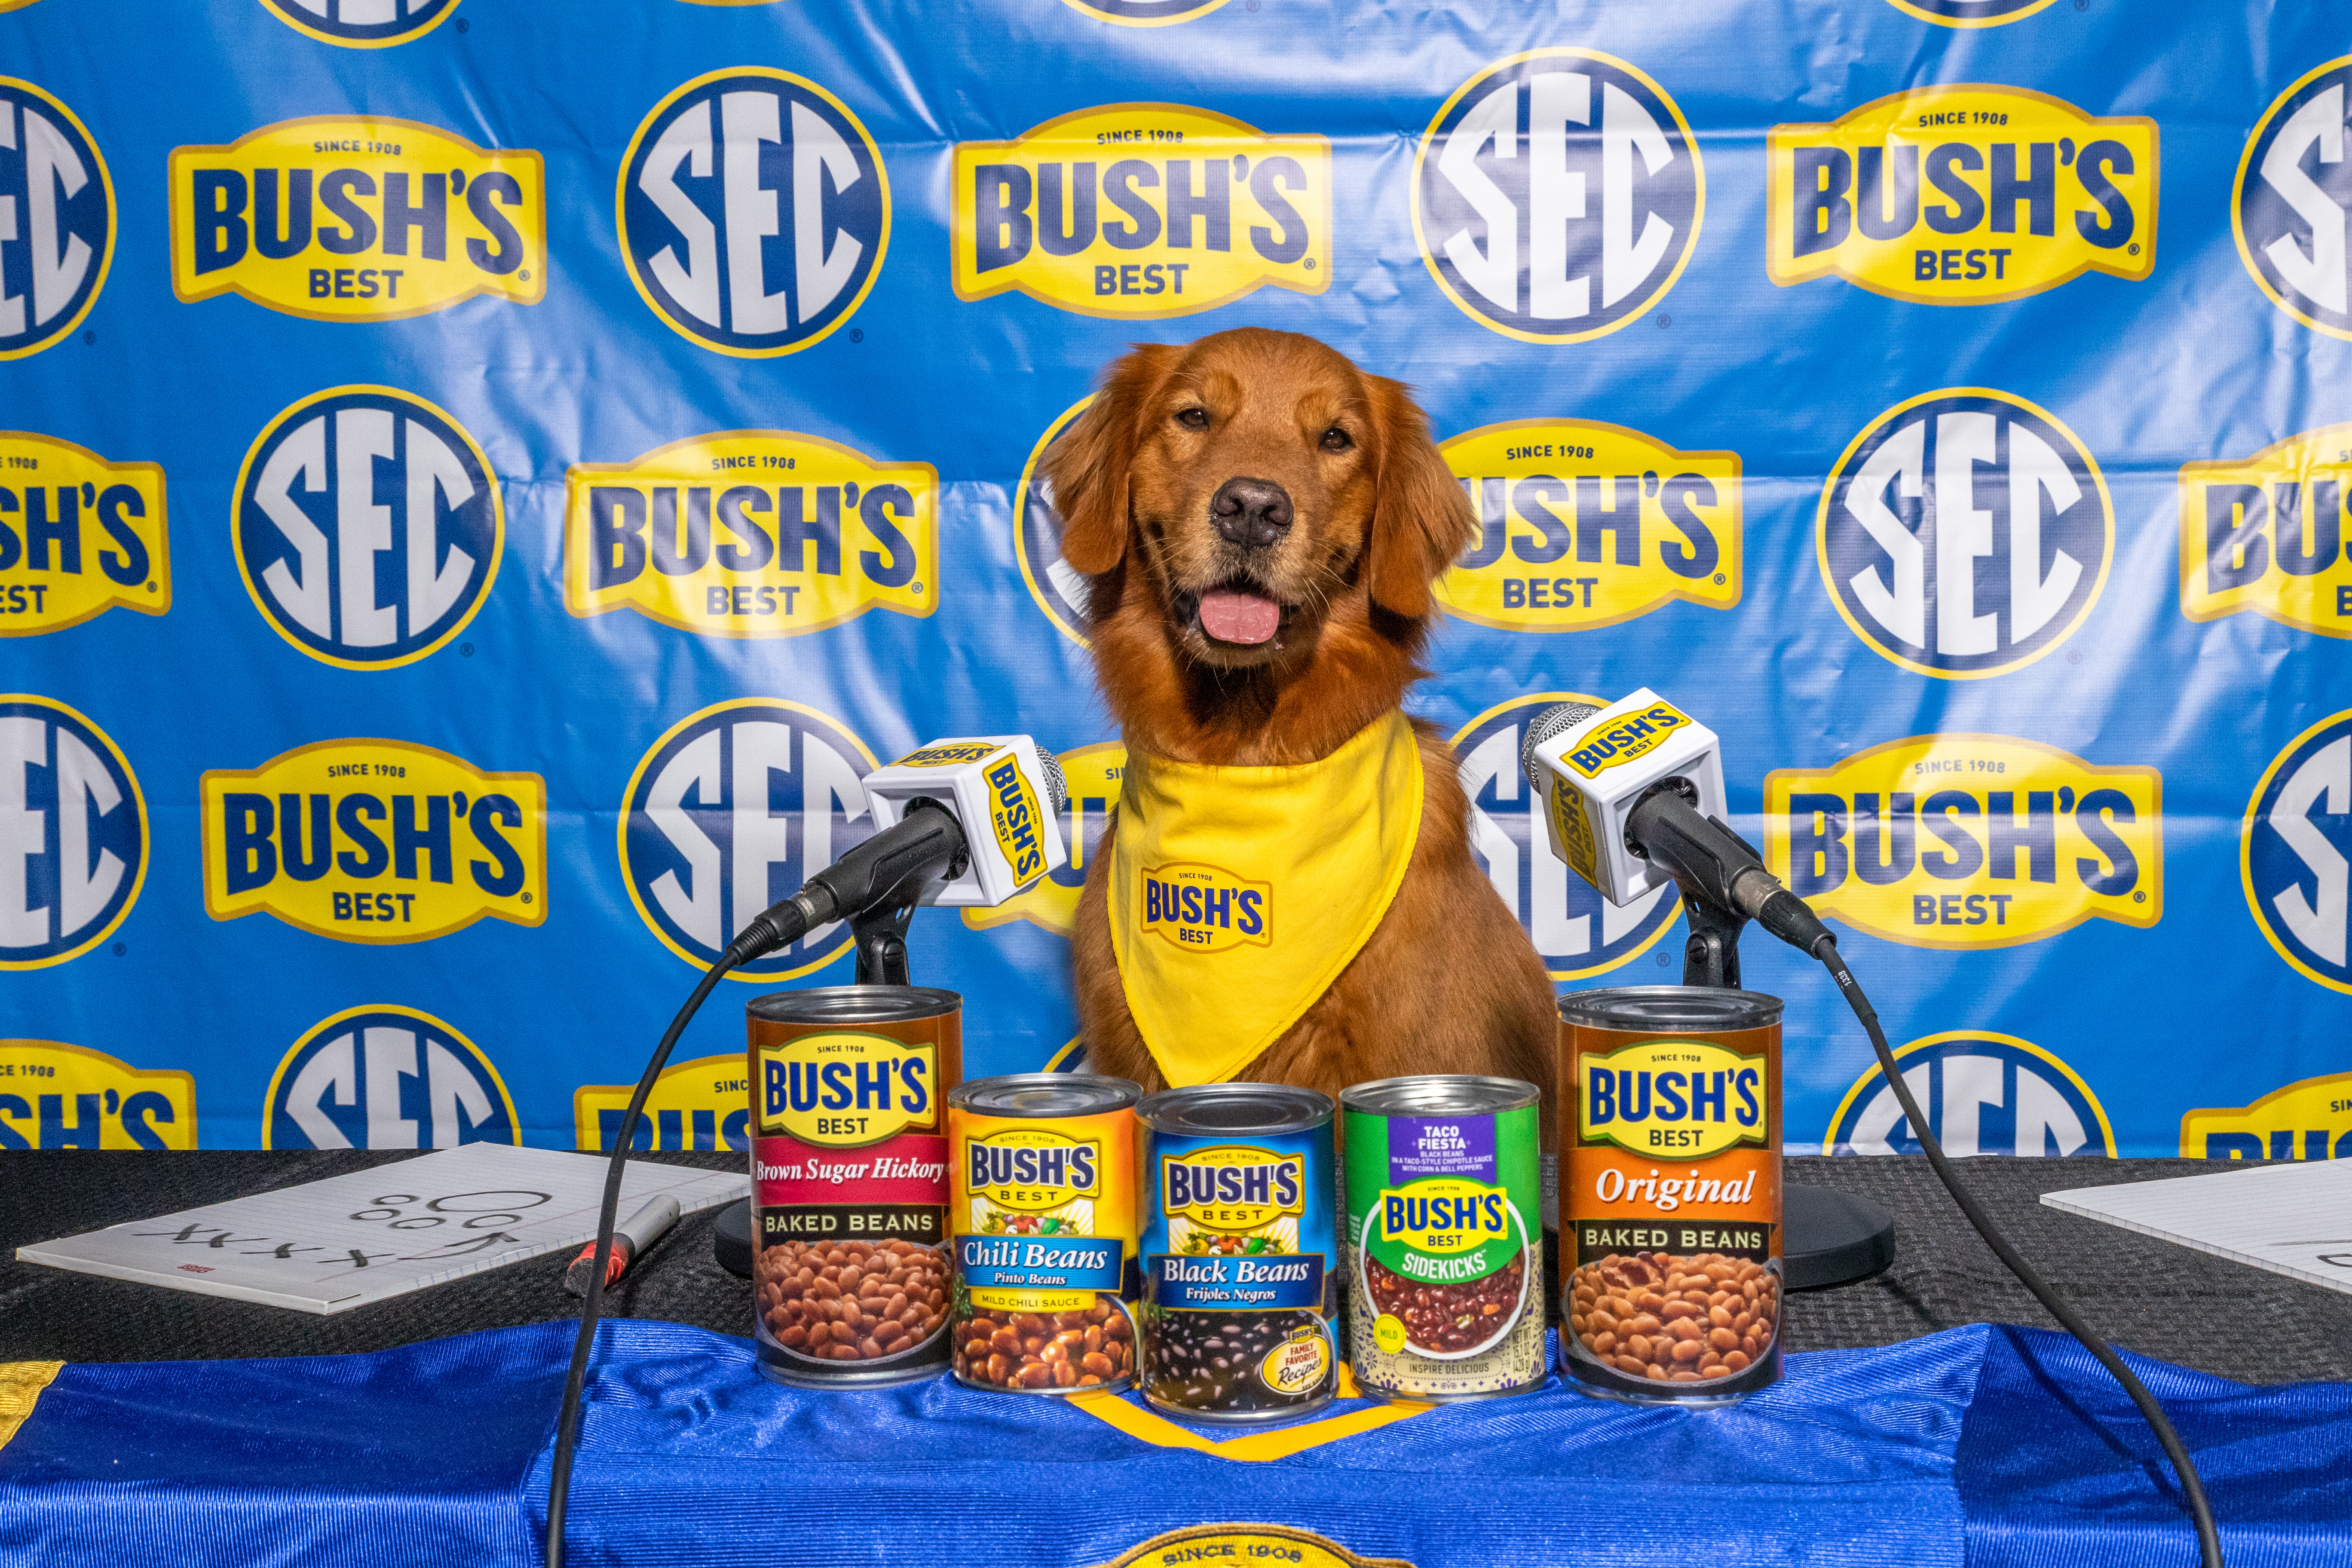 Duke at a podium with Bush's beans cans in front and the Bush's/SEC banner behind. 